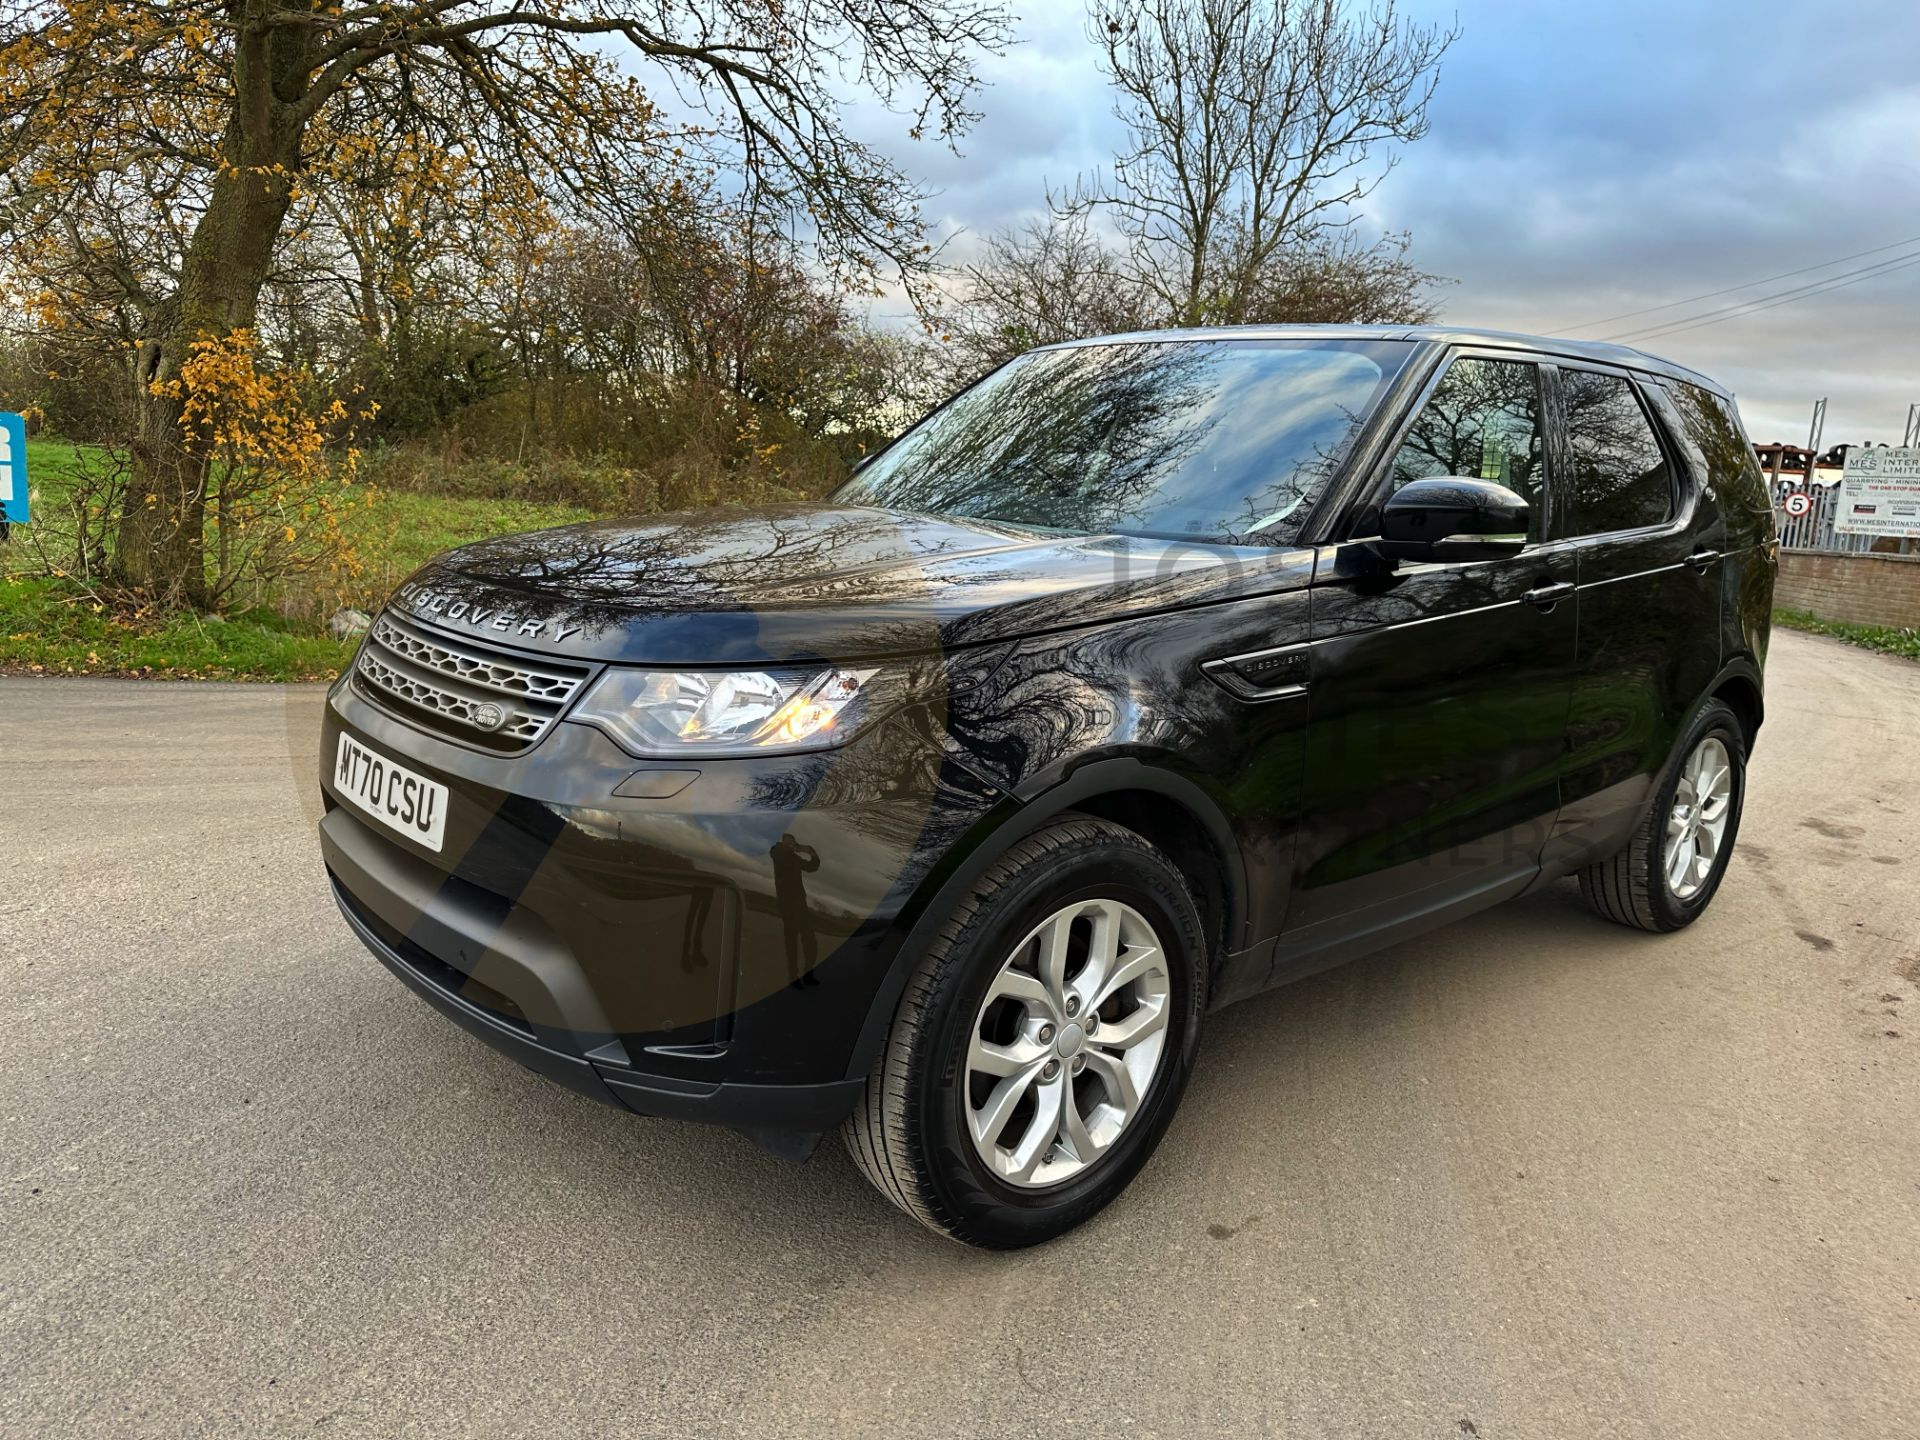 LAND ROVER DISCOVERY 5 *ALL NEW MODEL* (2021 - EURO 6) 8 SPEED AUTO (1 OWNER) *ONLY 19,000 MILES* - Image 6 of 50